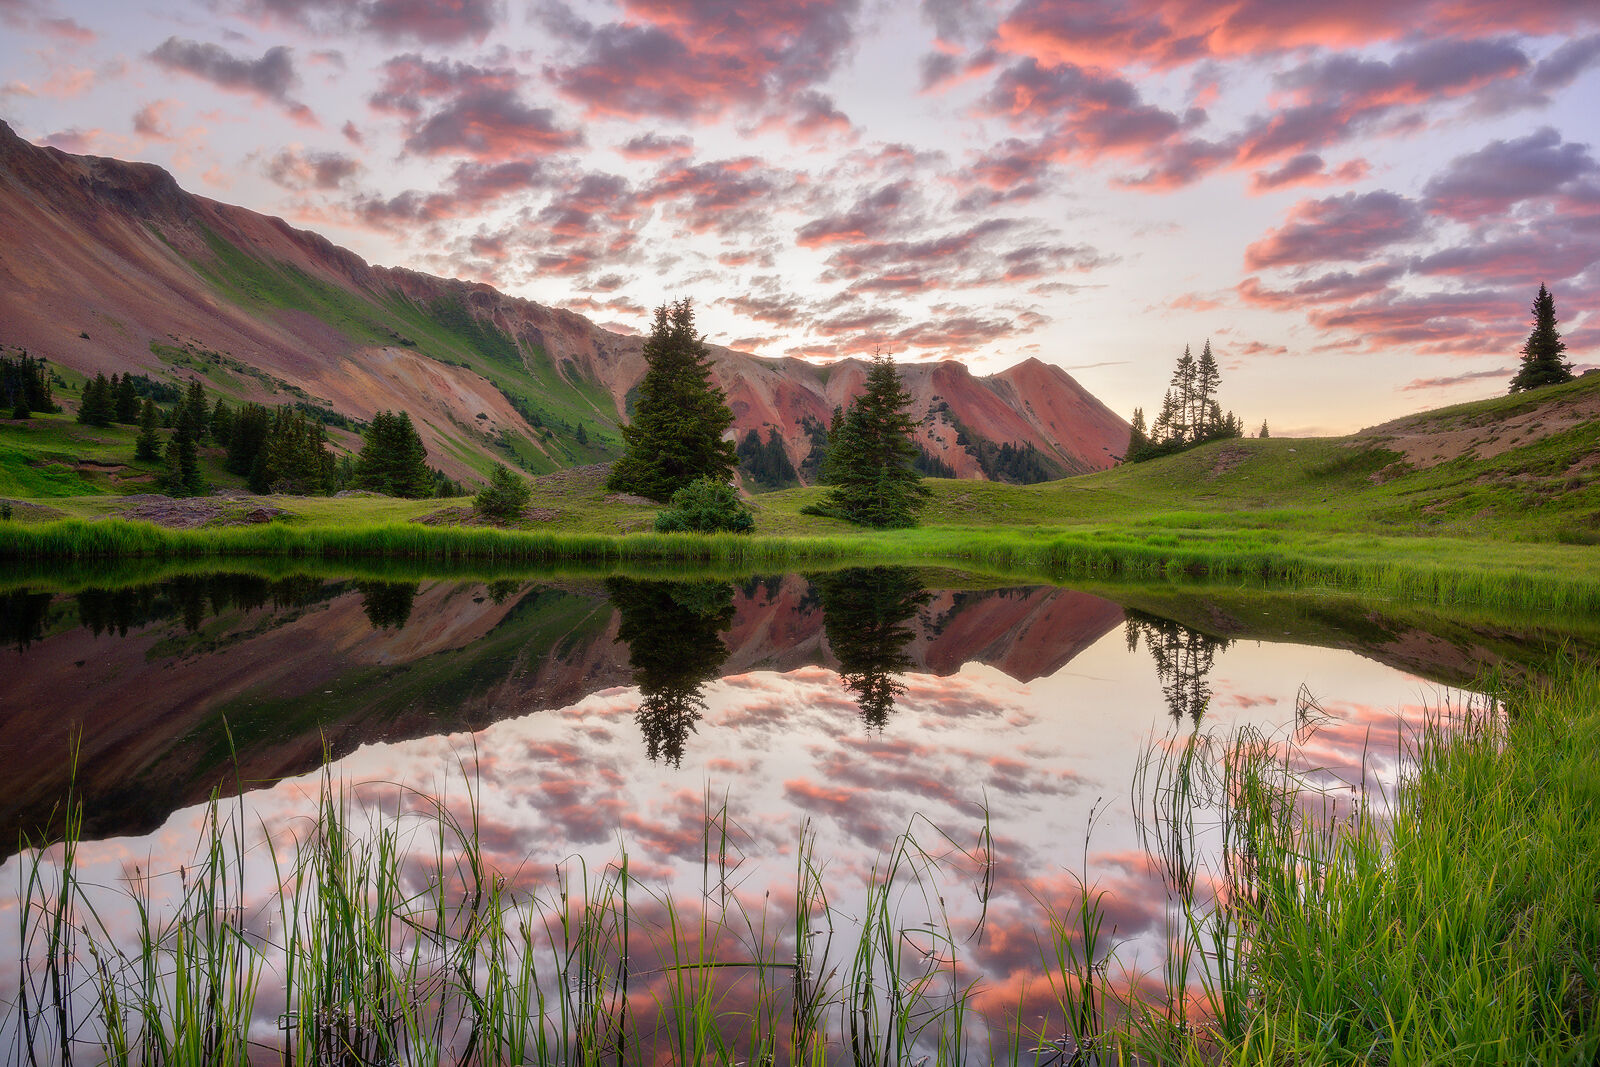 Green grass surrounds a still lake with mountains in the background and pink clouds in the sky at sunset - all of which is reflected on the water.